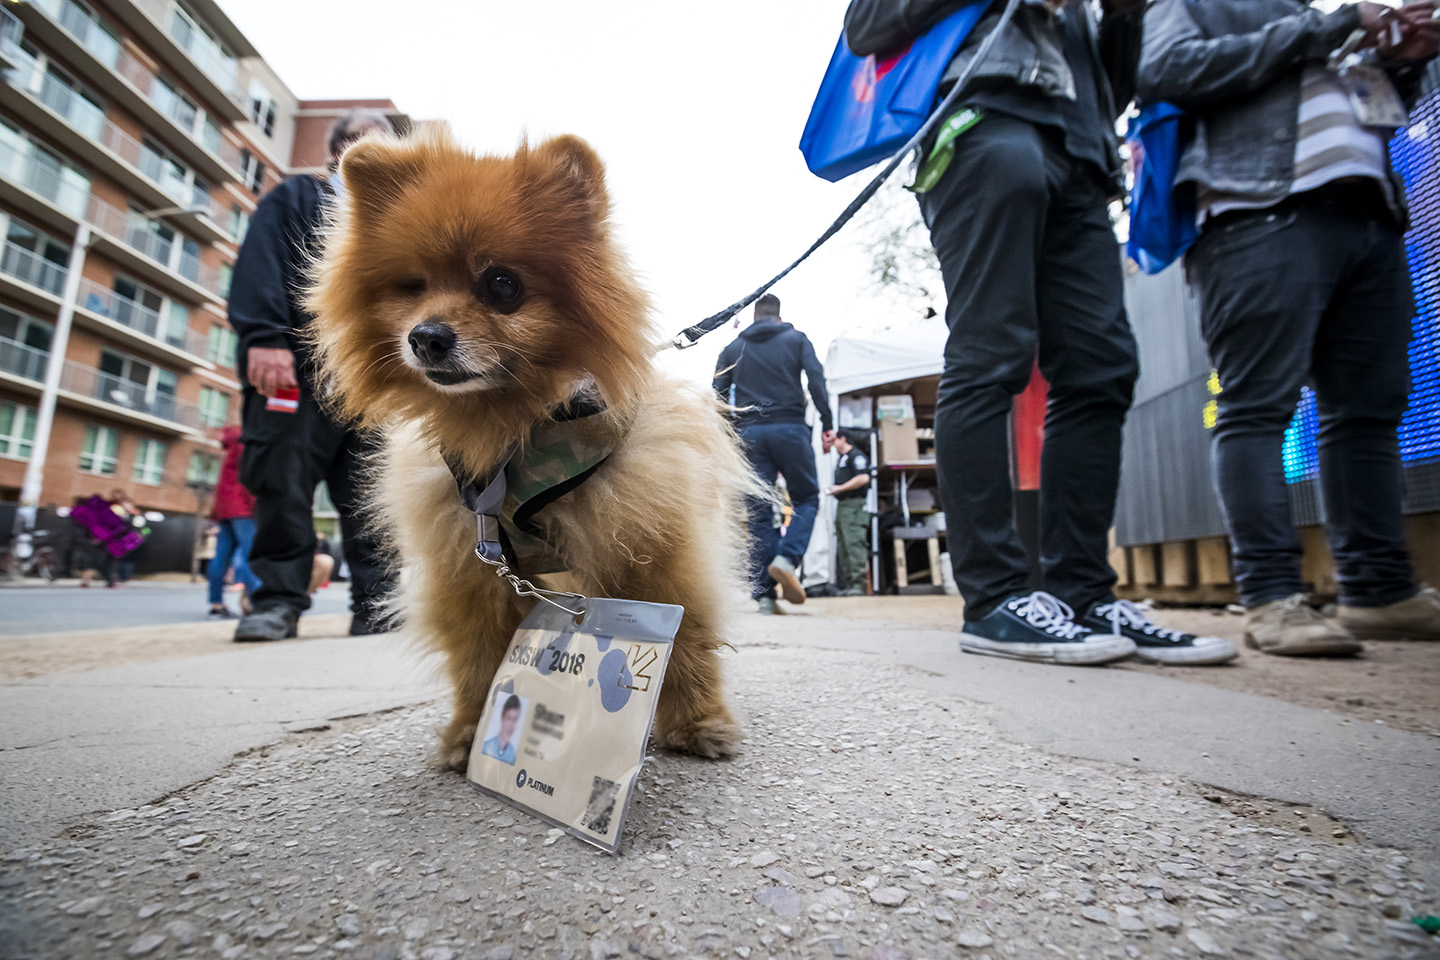 Just a service reminder that badges aren’t transferable, even to your dog. Photo by Aaron Rogosin